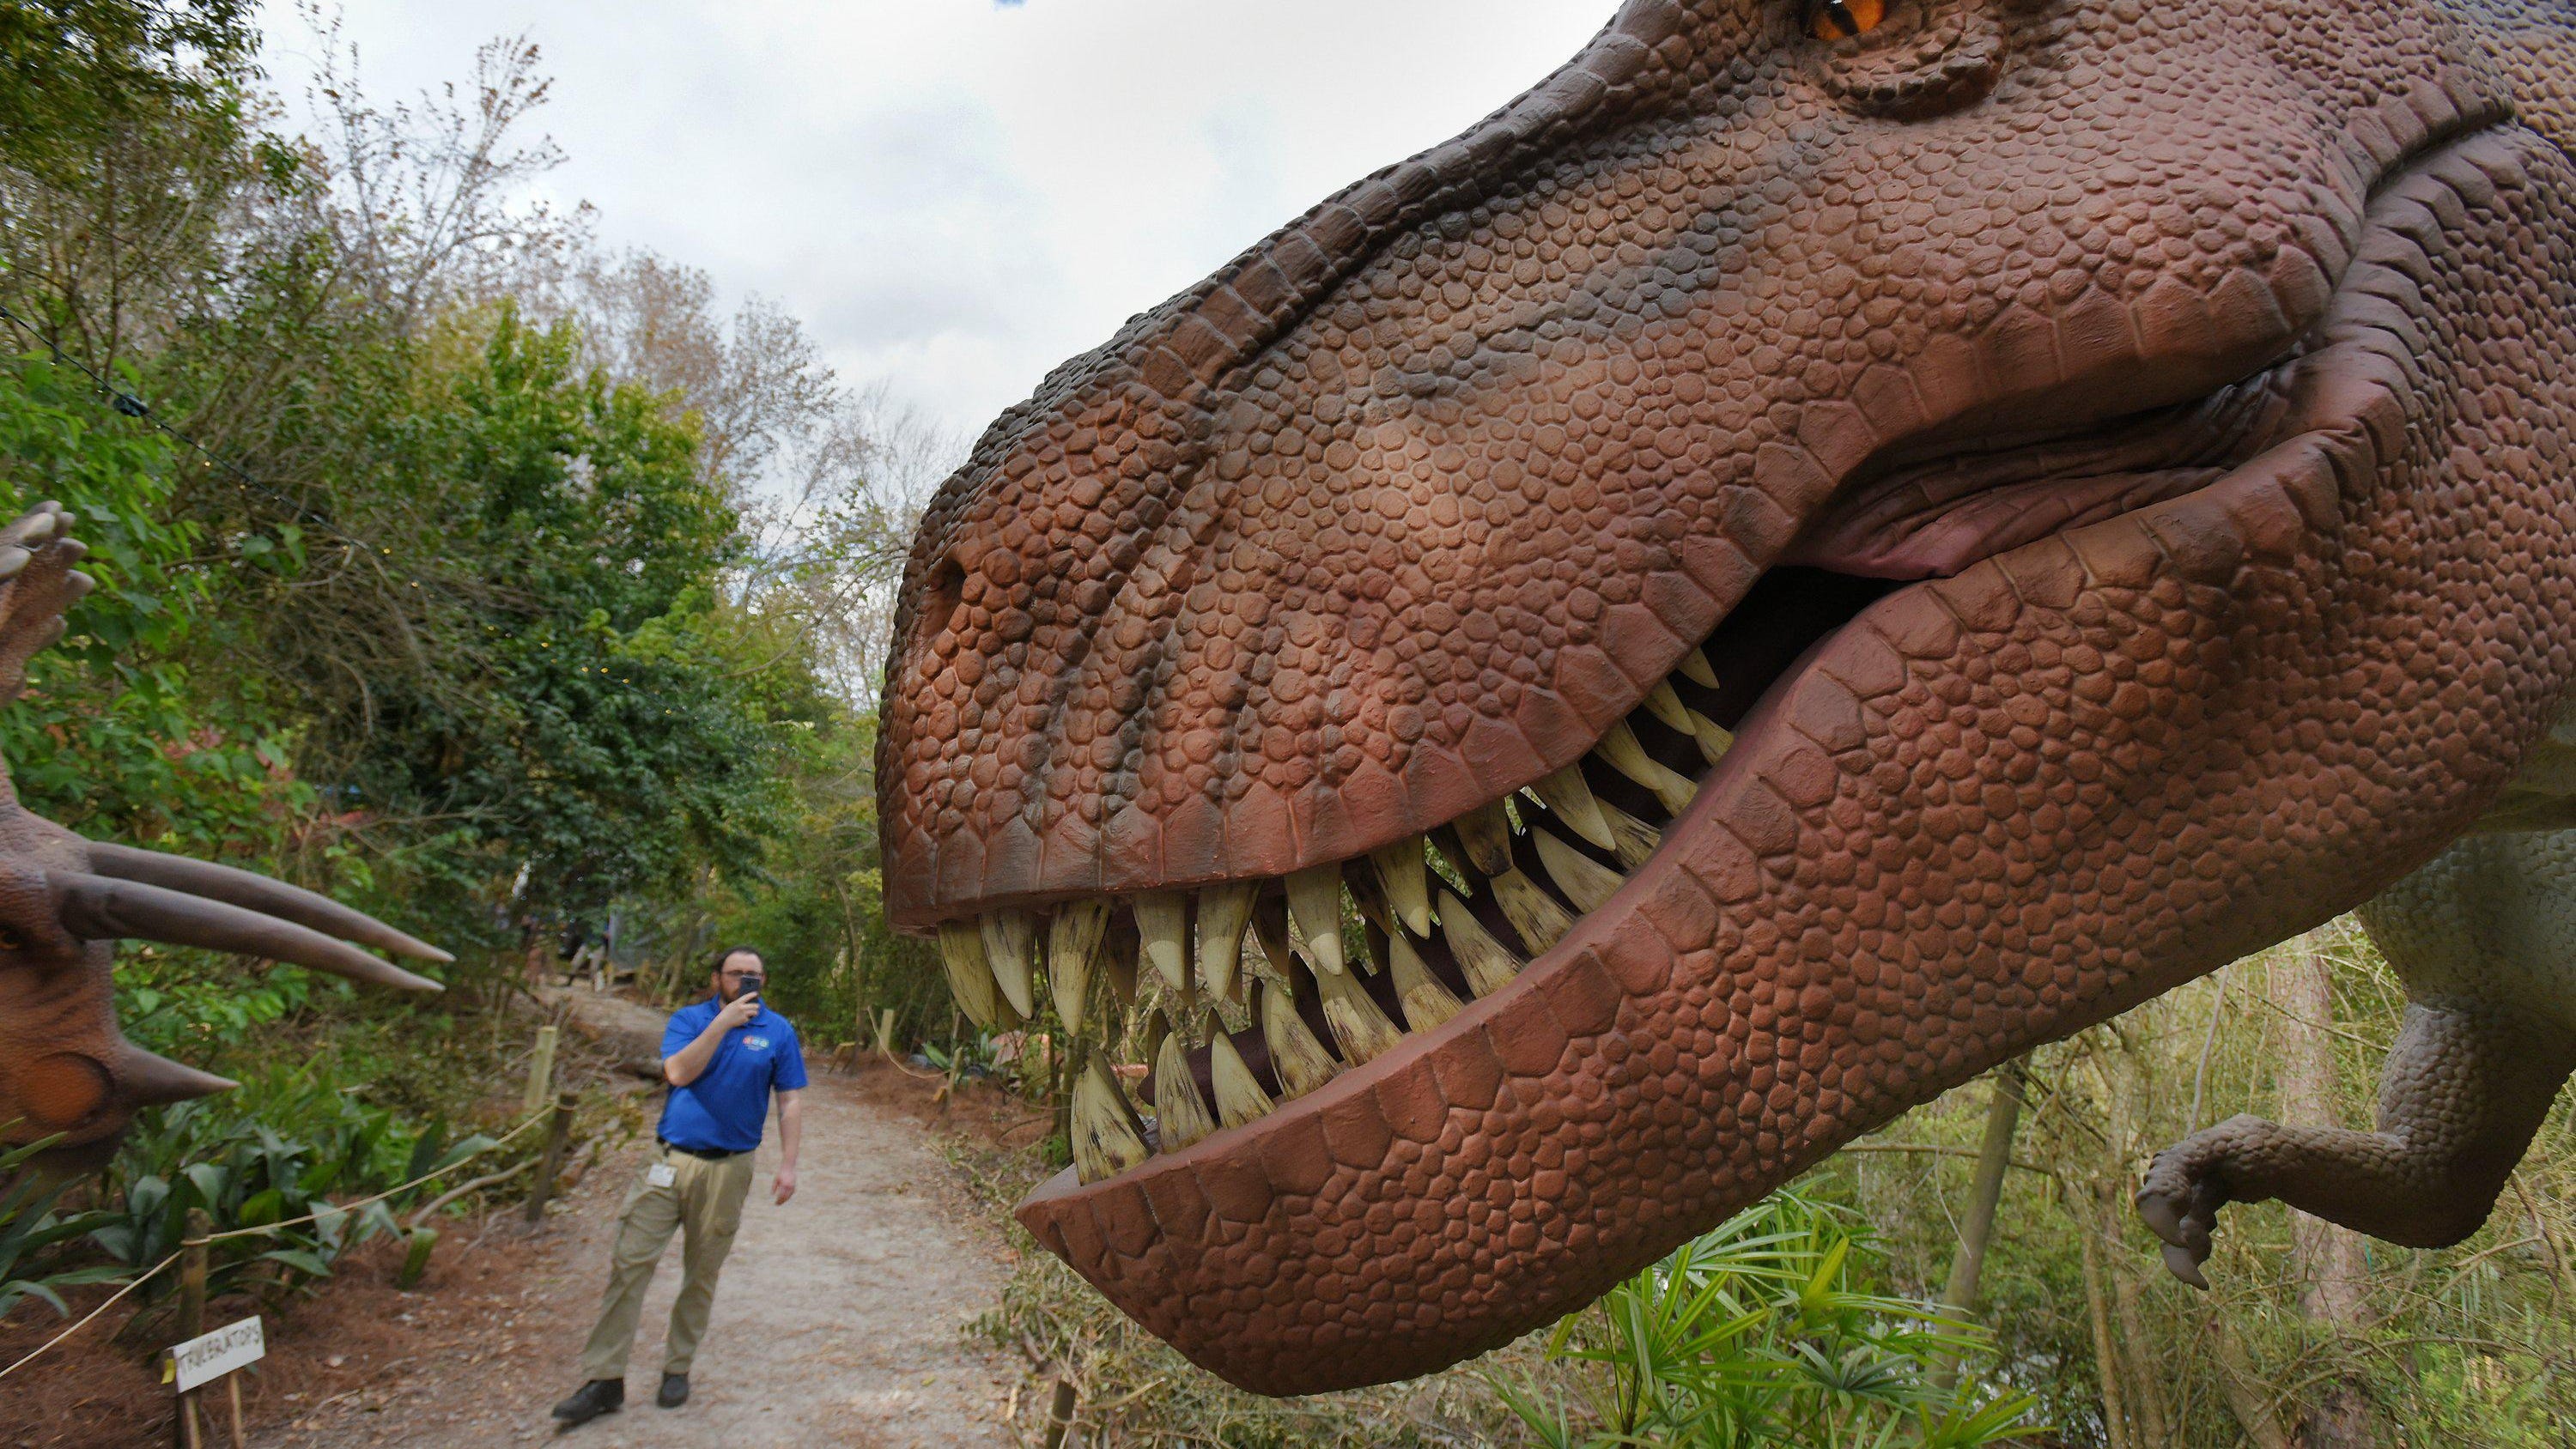 Jacksonville Zoo brings back Dinosauria with new, roaring adventures